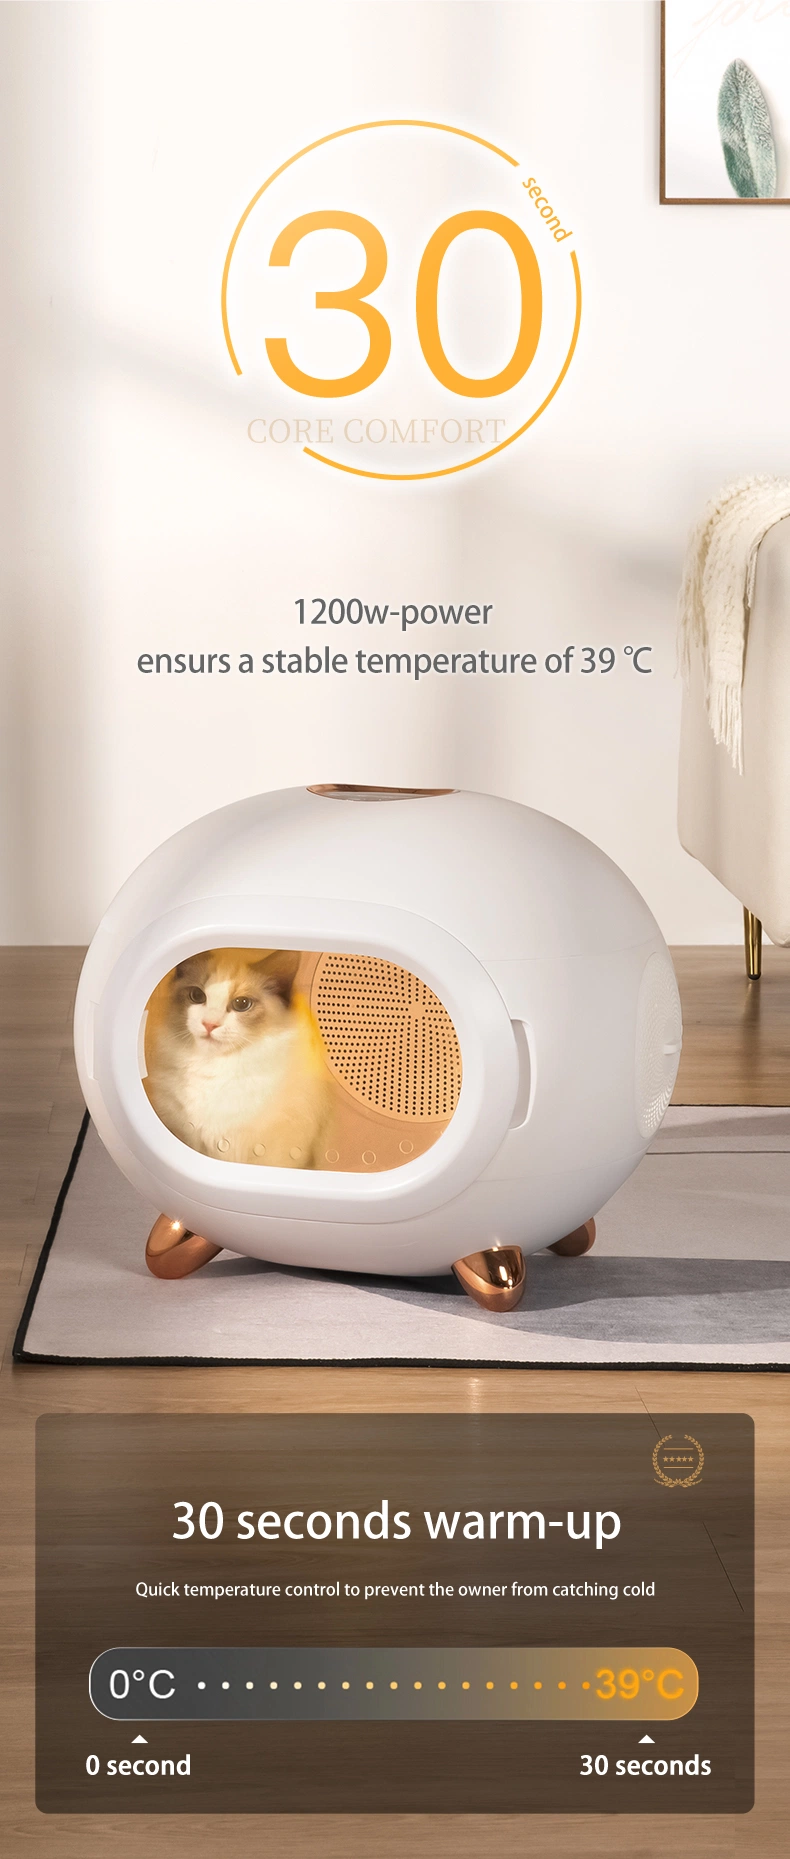 Pet Dryer for Cats and Dogs Free Hands and Easy Drying Quiet Pet Hair Dryer Box